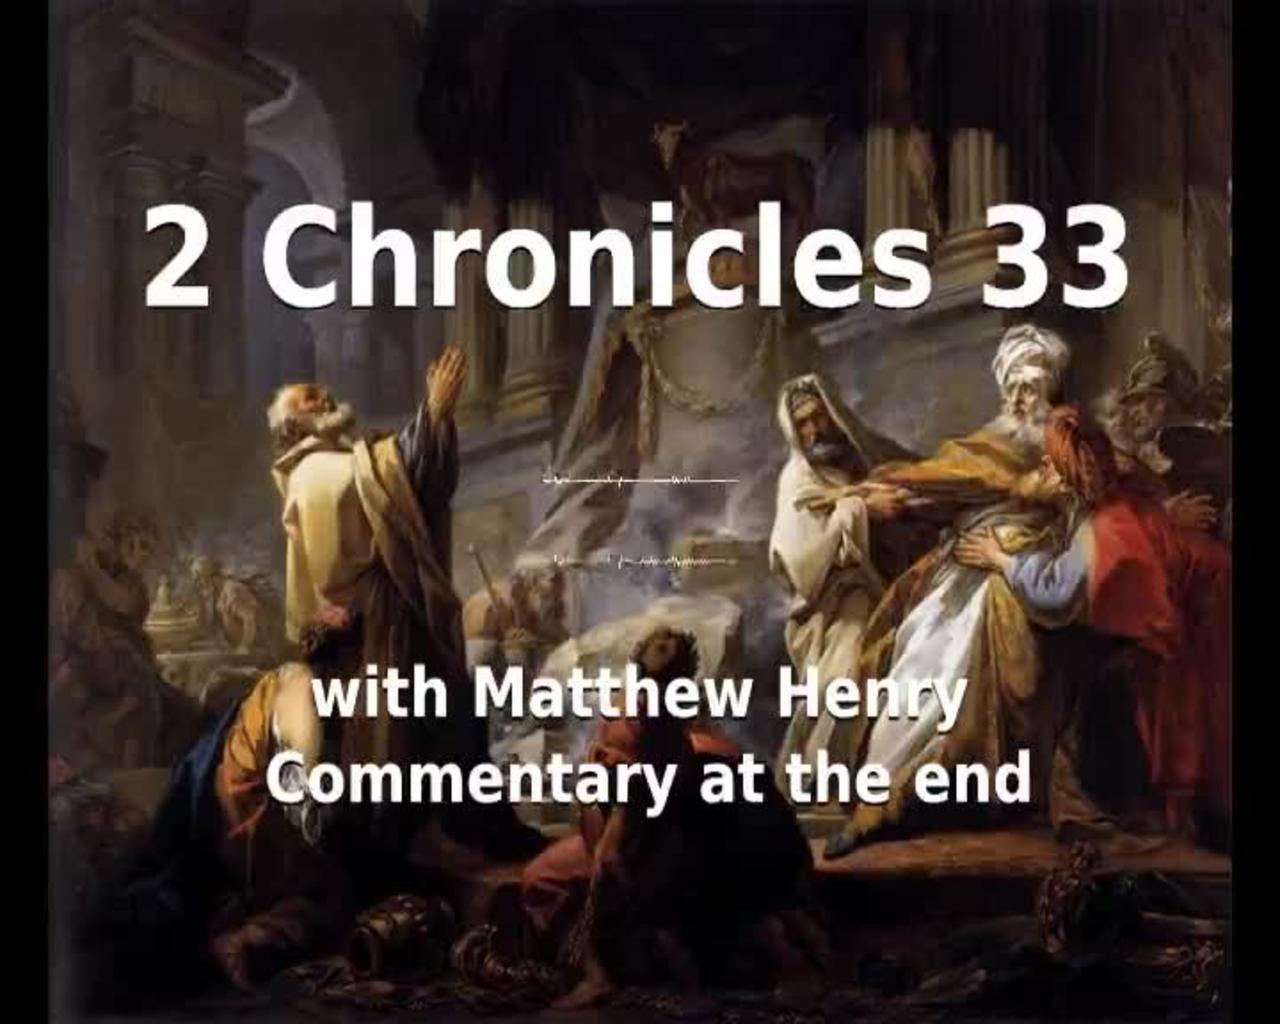 📖🕯 Holy Bible - 2 Chronicles 33 with Matthew Henry Commentary at the end.